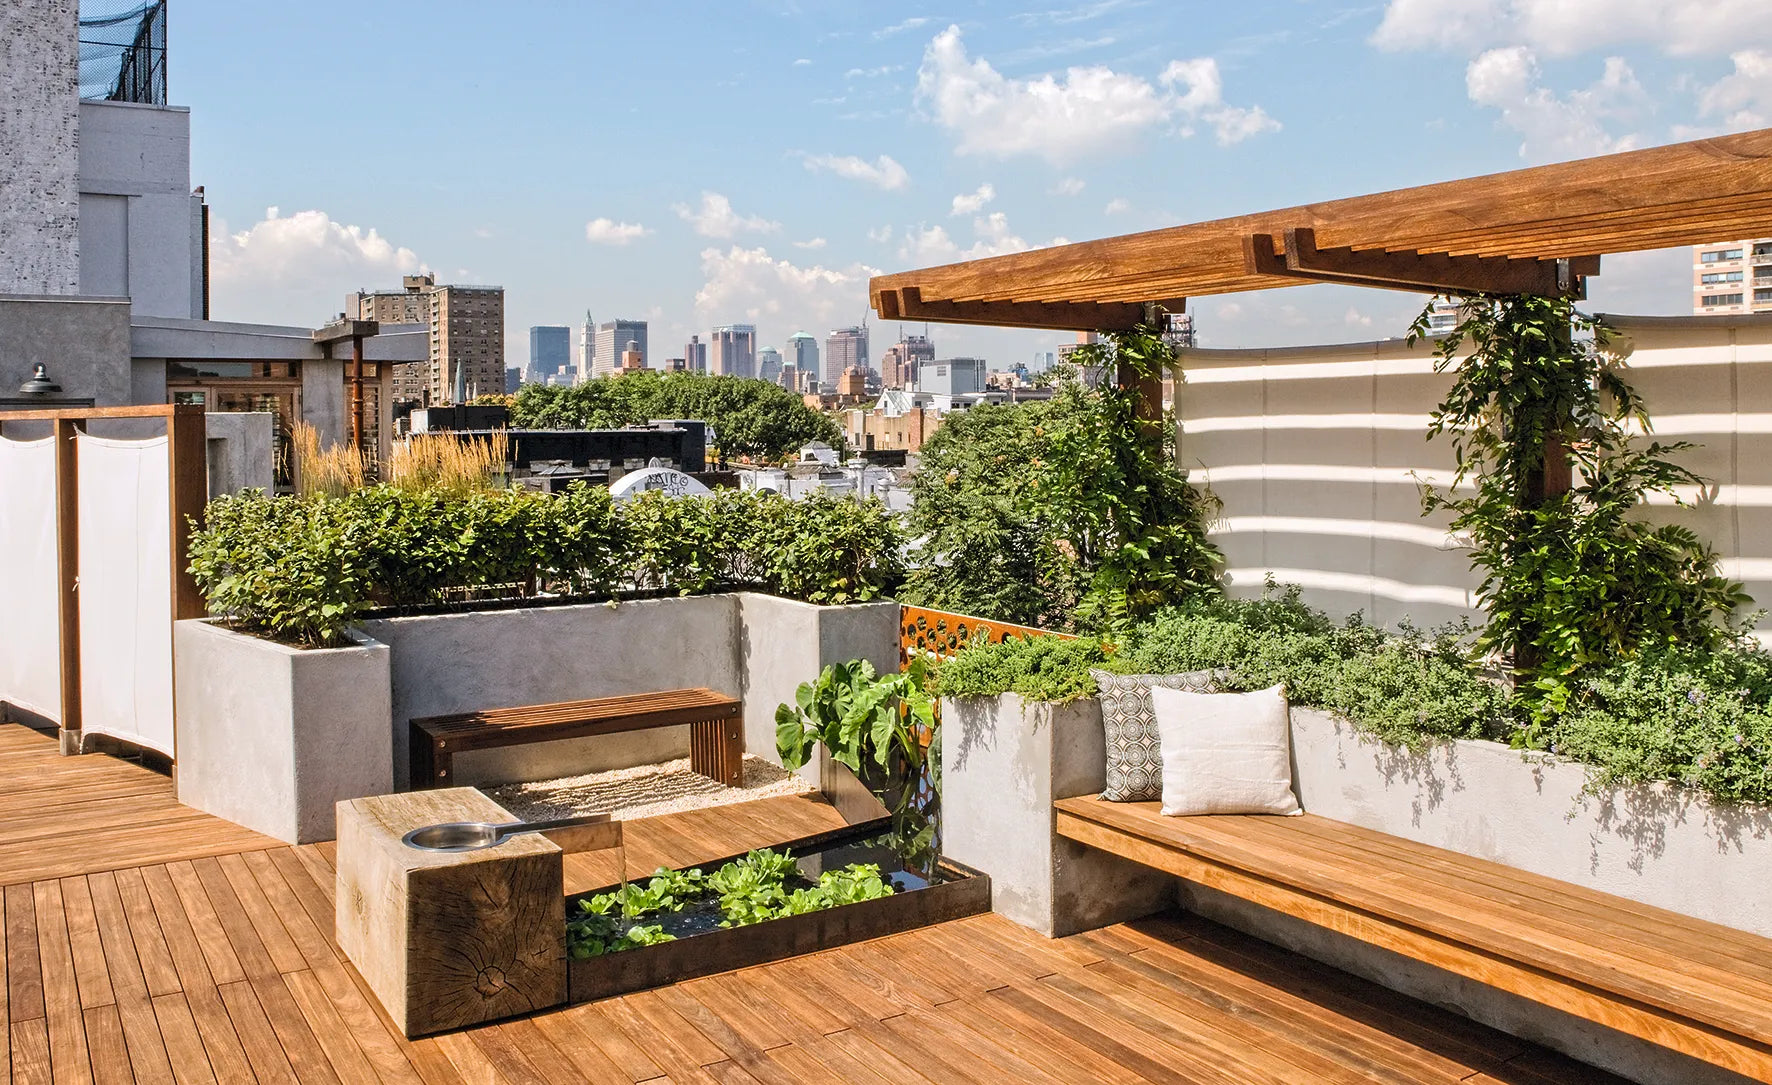 From Rooftops to Retreats: Why Rooftop Gardens Are Sprouting Up Everywhere  and How to Start Your Own – Sawatta